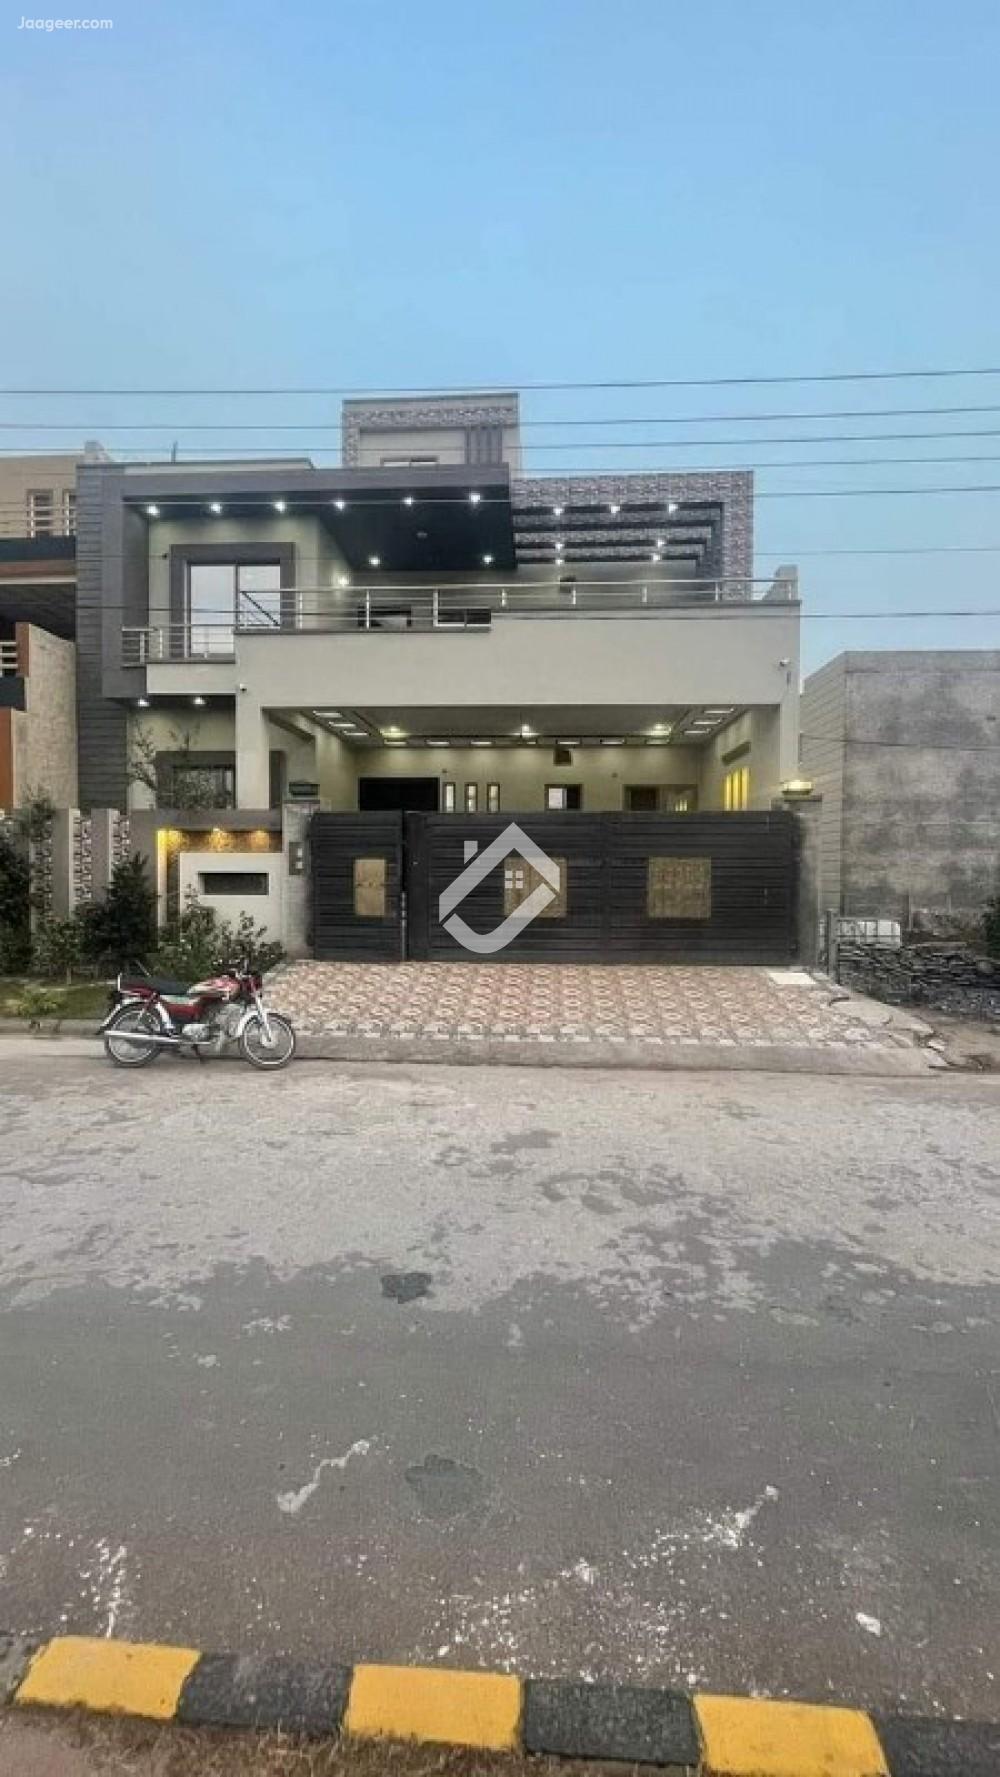 View  11.25 Marla Double Storey House For Sale In Khayaban E Naveed in Khayaban E Naveed, Sargodha